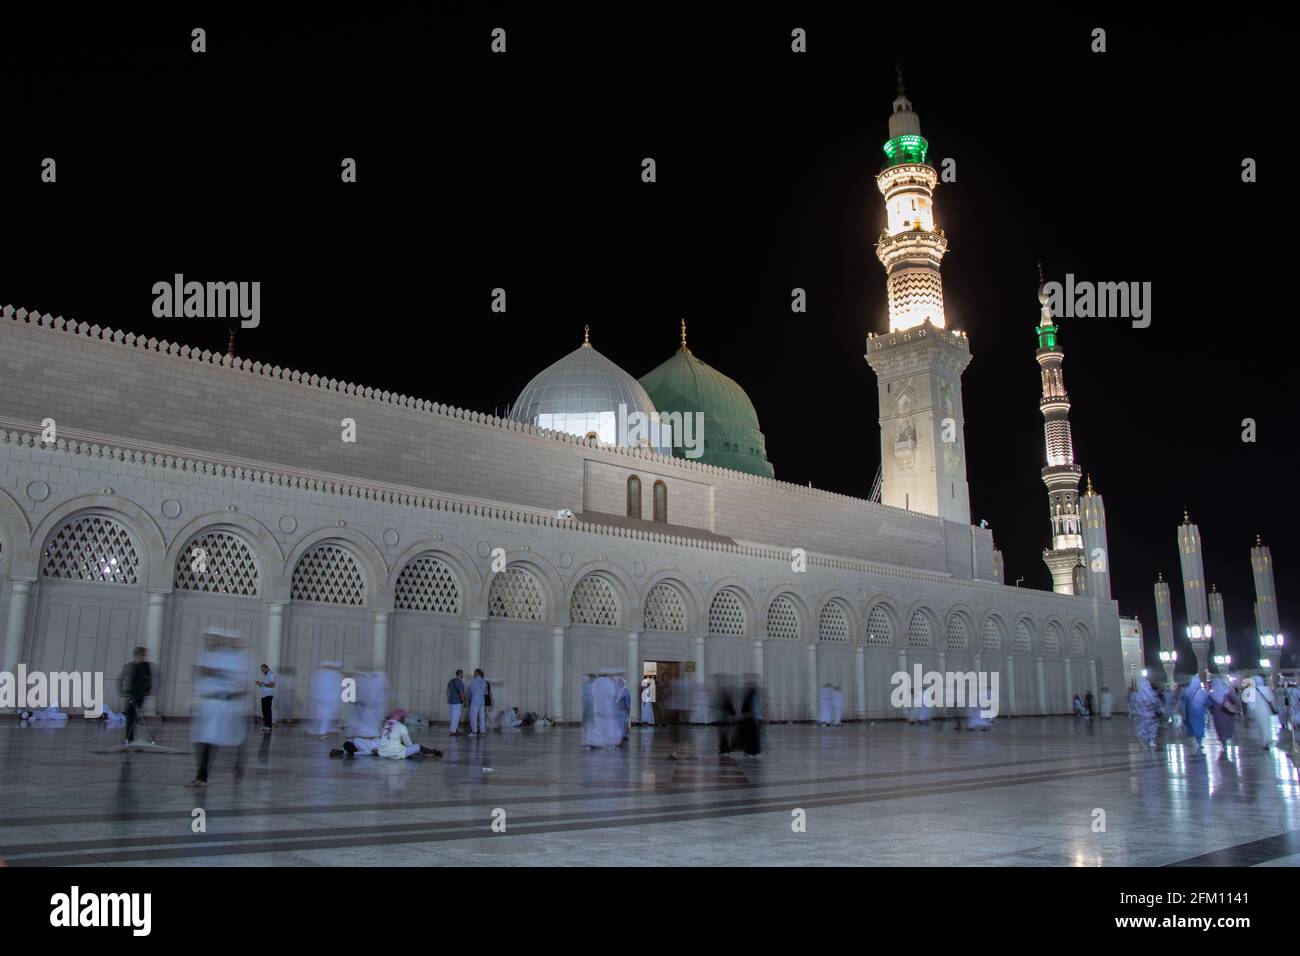 Masjid Nabawi at night time. People walking at night at the Prophet's Mosque in Medina Stock Photo